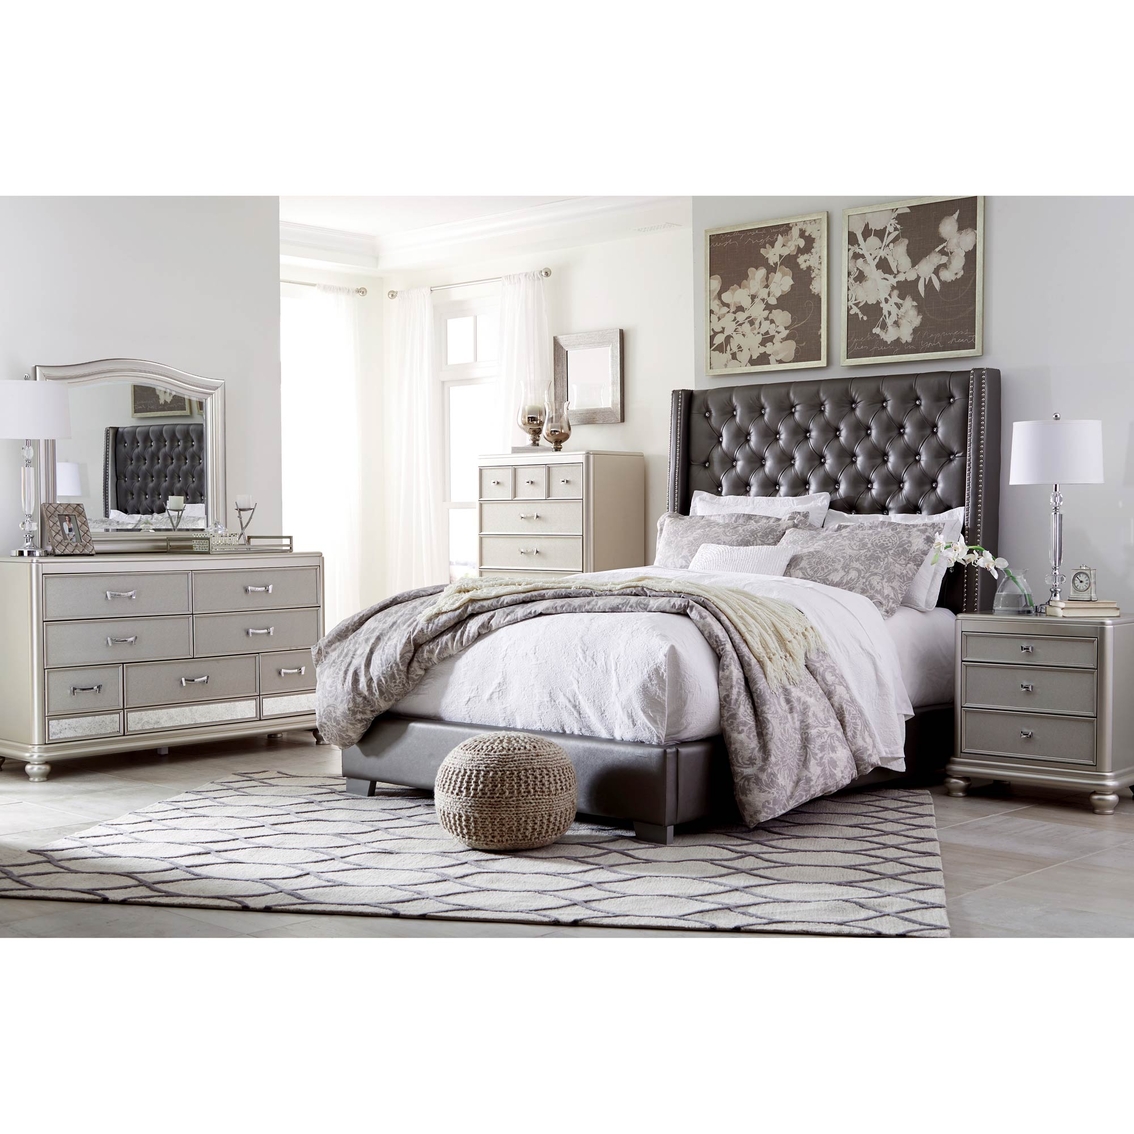 Signature Design by Ashley Coralayne Upholstered Bed - Image 4 of 4